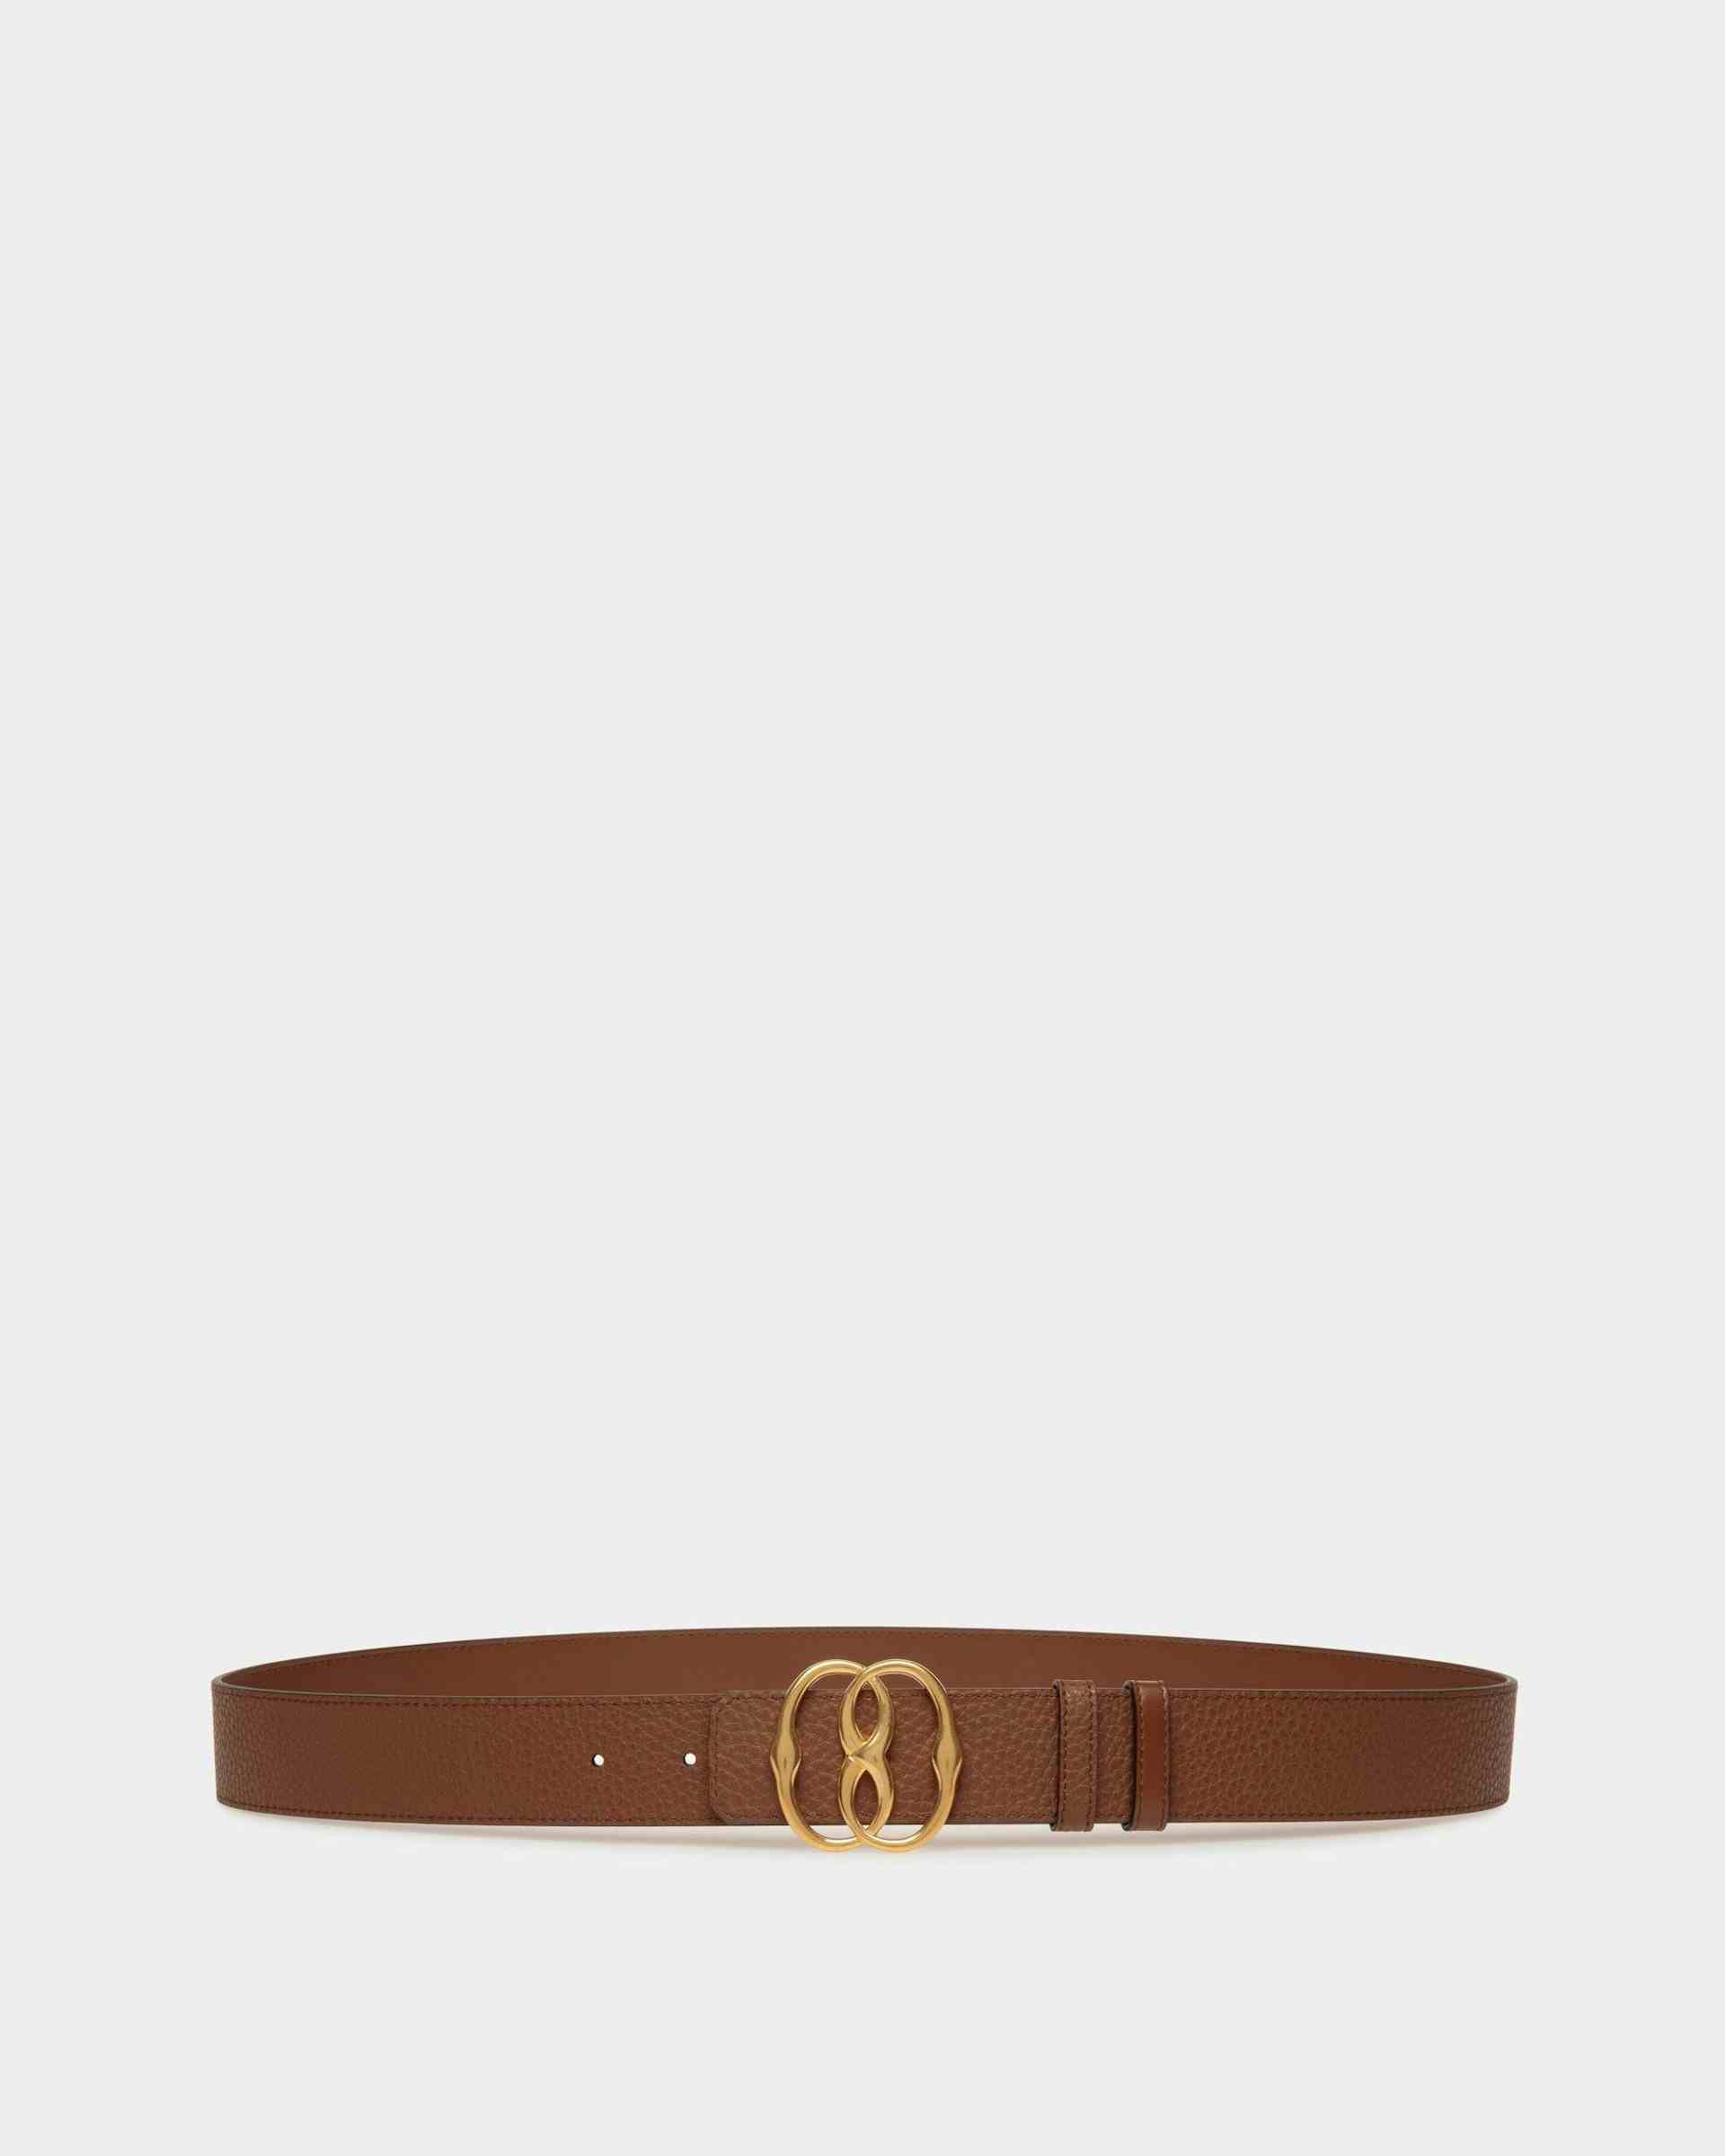 Bally Iconic 35mm Belt In Brown Leather - Men's - Bally